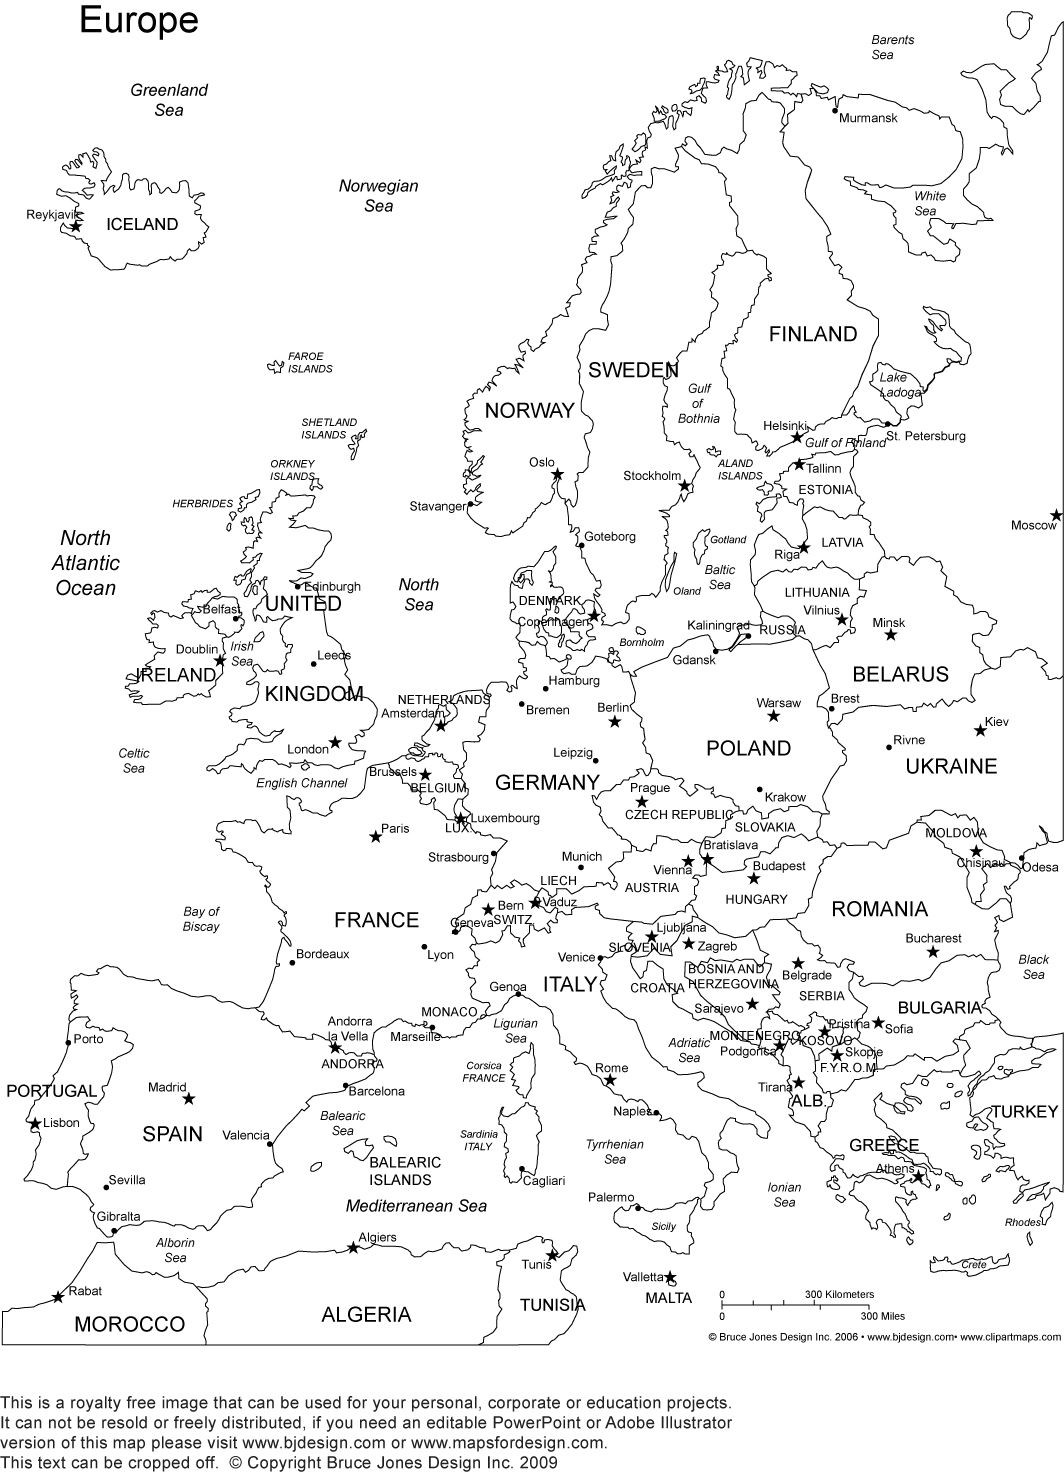 Printable Map Activities Awesome Europe Printable Blank Map Royalty Free As Well As Other